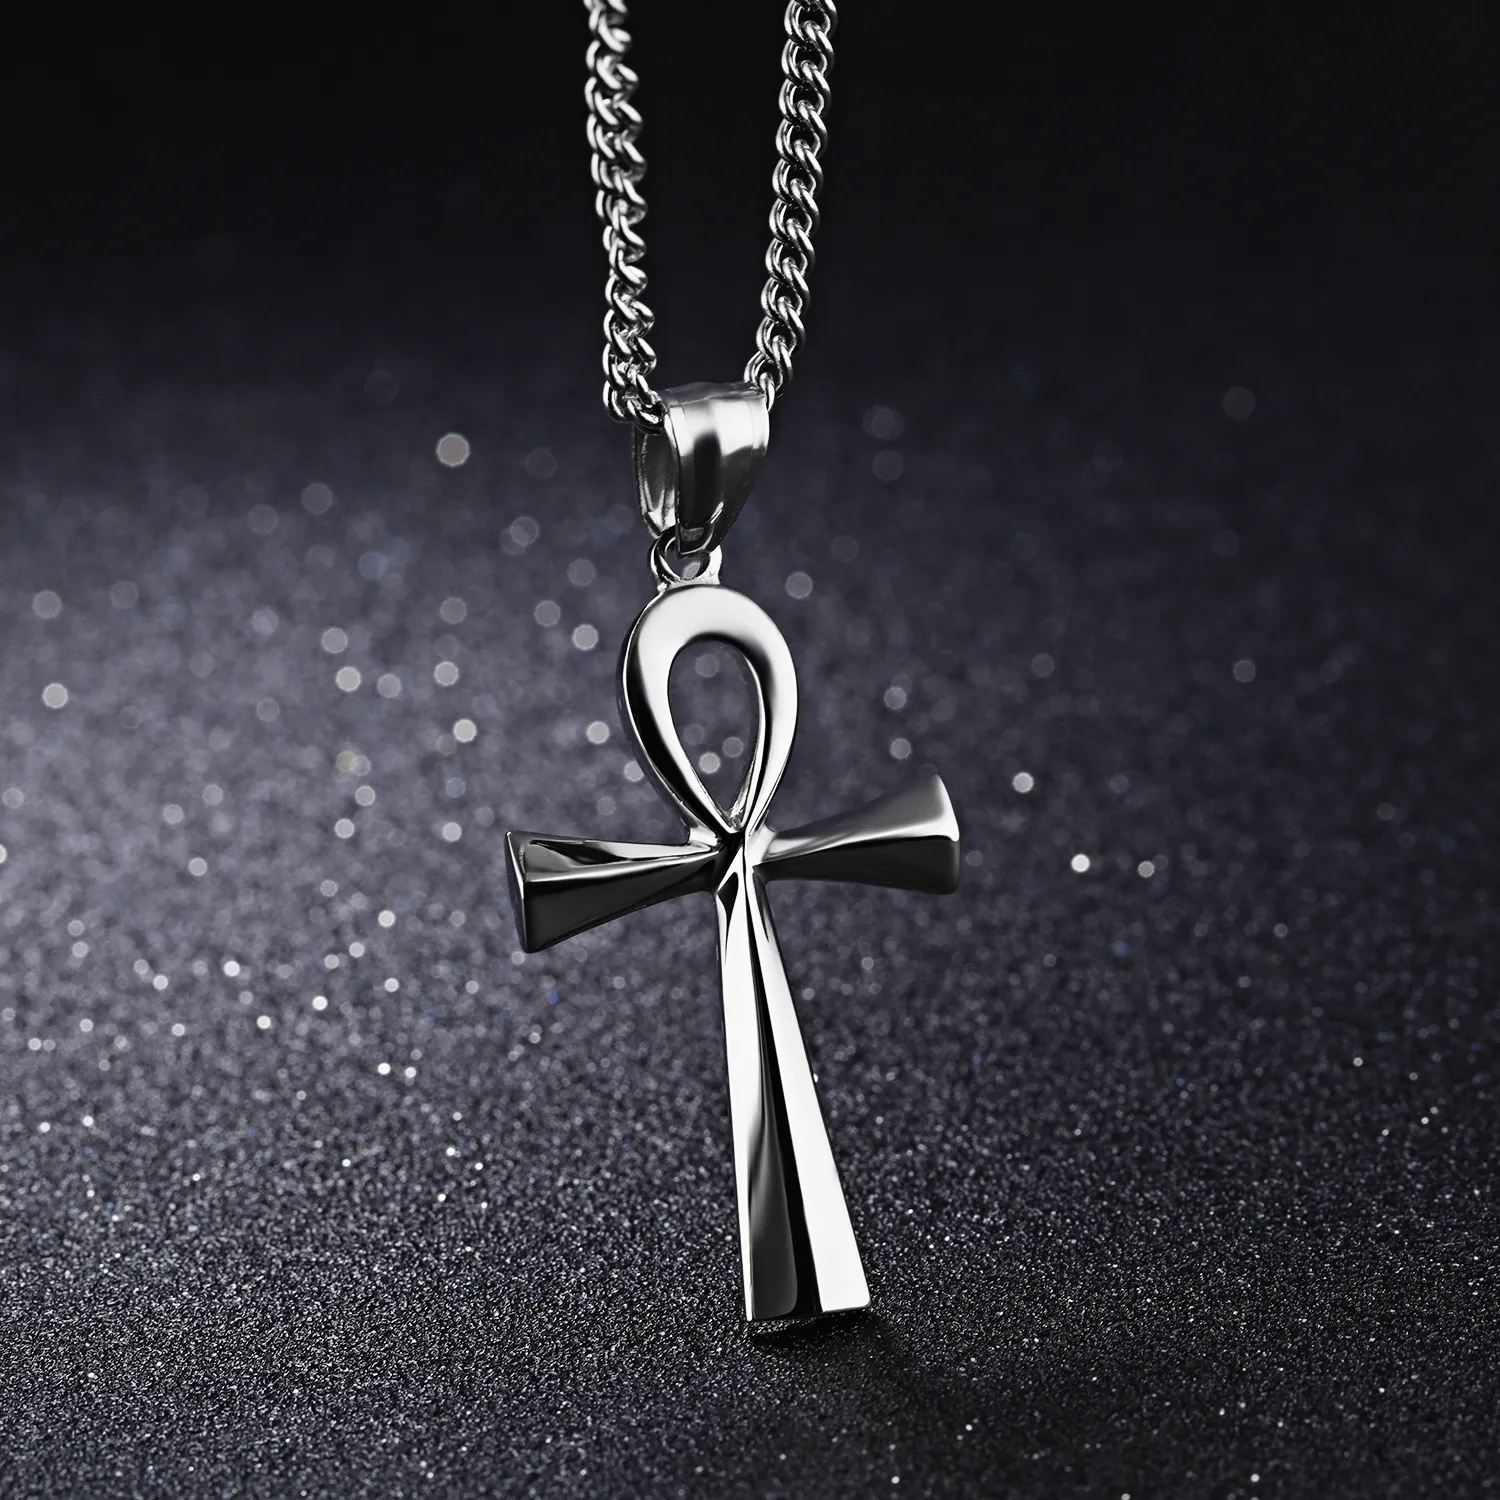 25x43mm Hieroglyph Jewelry Meaning Life Egyptian Ankh Pendants Necklace in Stainless Steel - Silver Gold Black278R